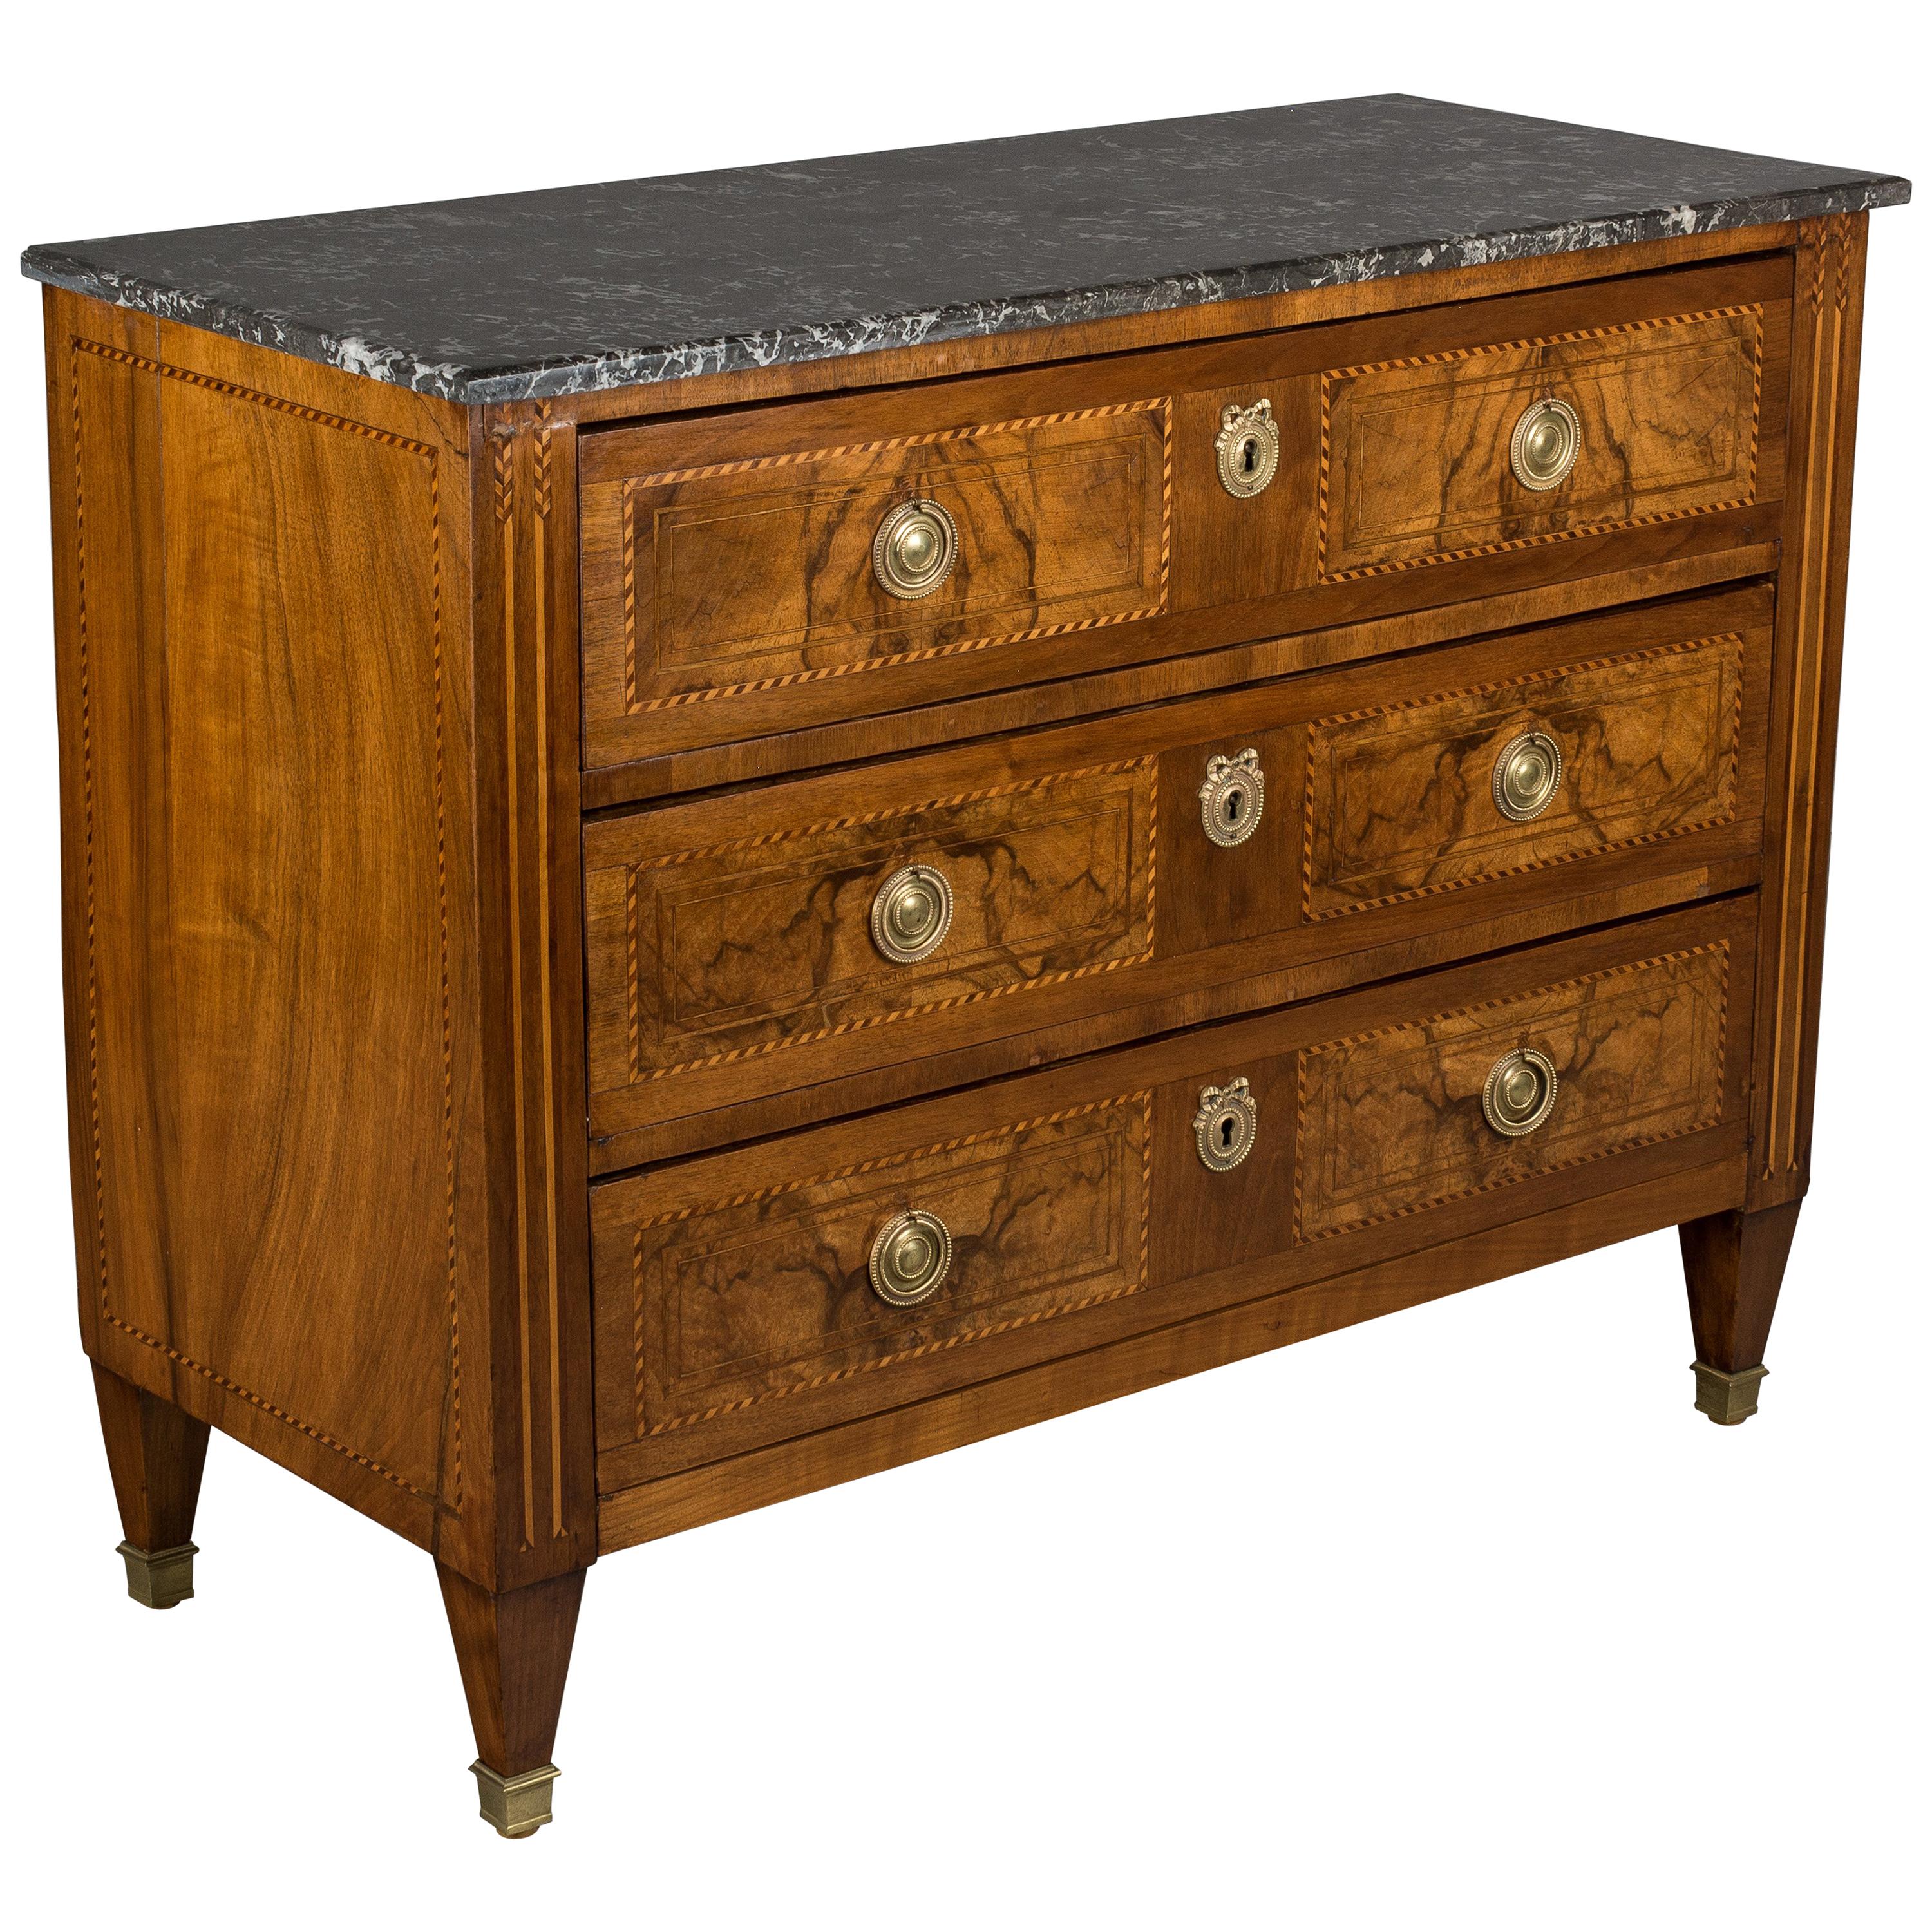 Early 19th Century Louis XVI Style Marquetry Commode